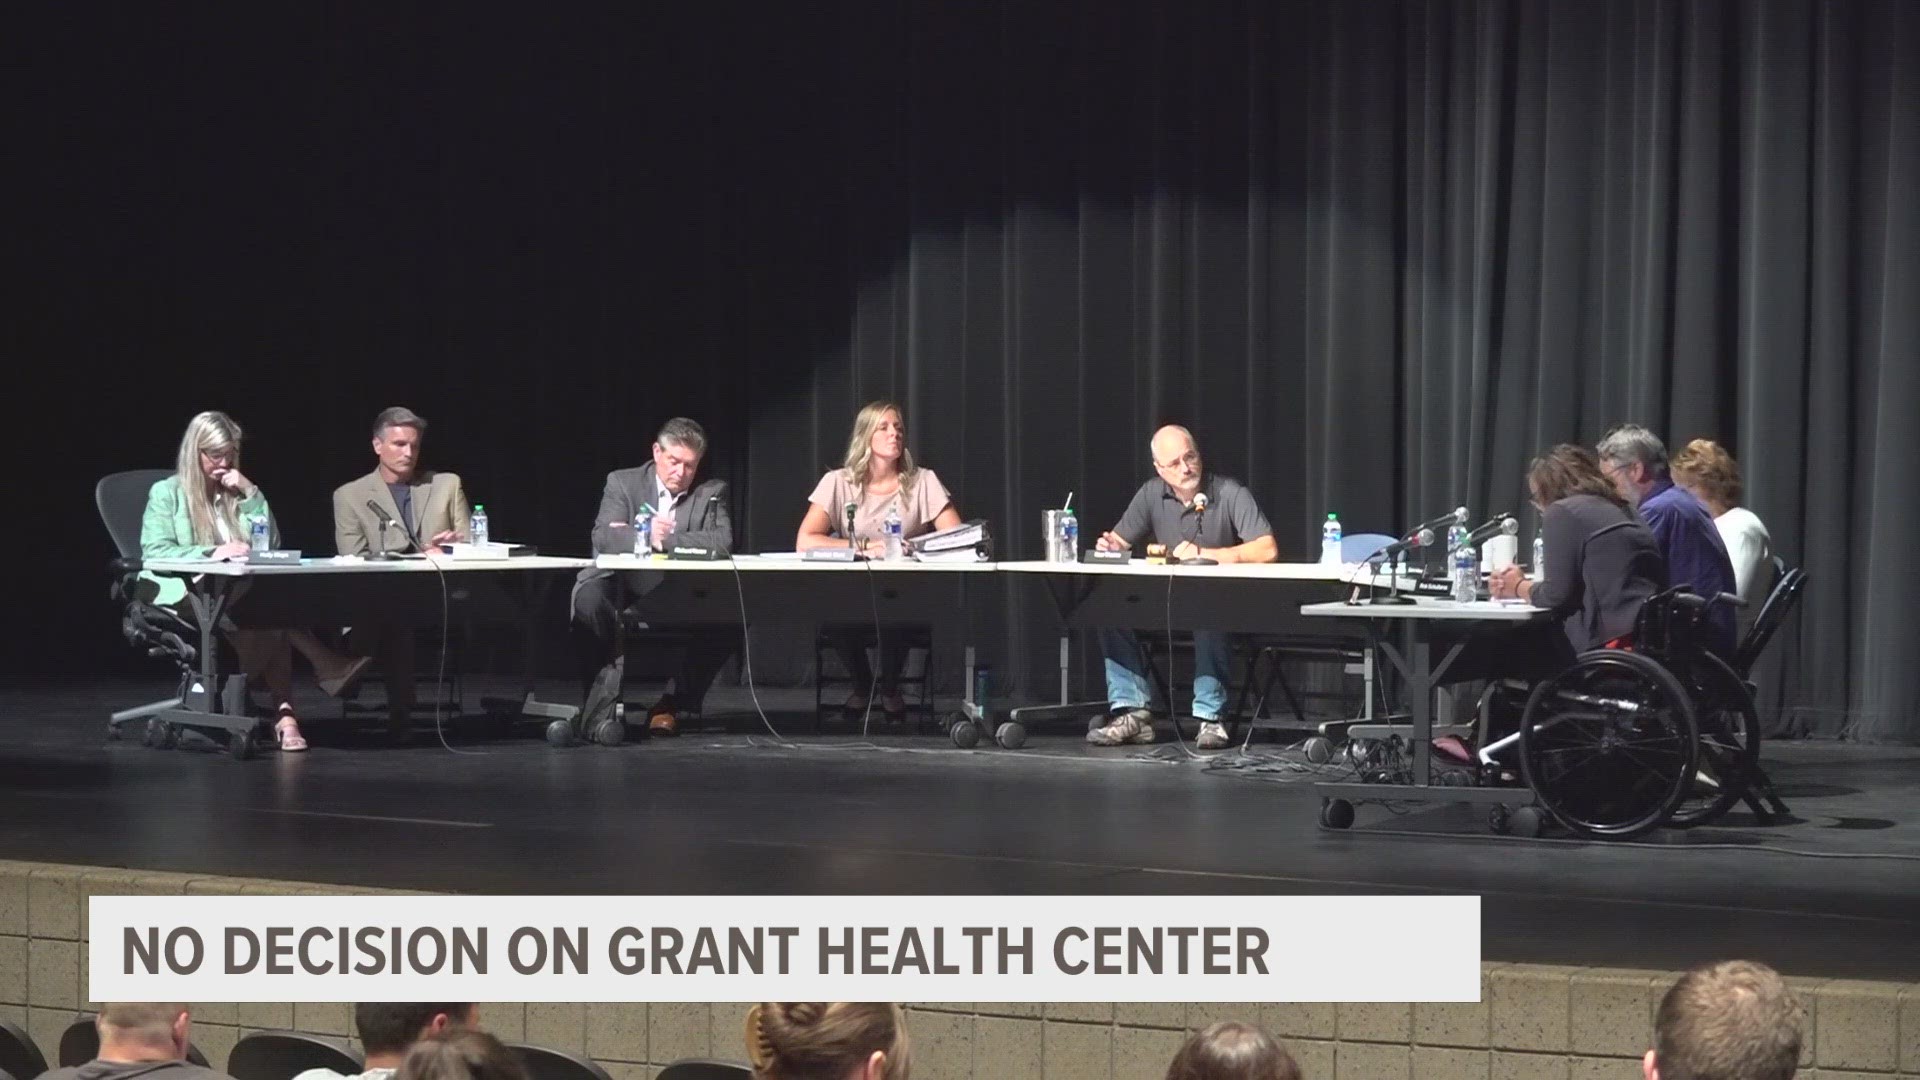 At their Monday night meeting the schoolboard did not reach a decision on the future of the health center.